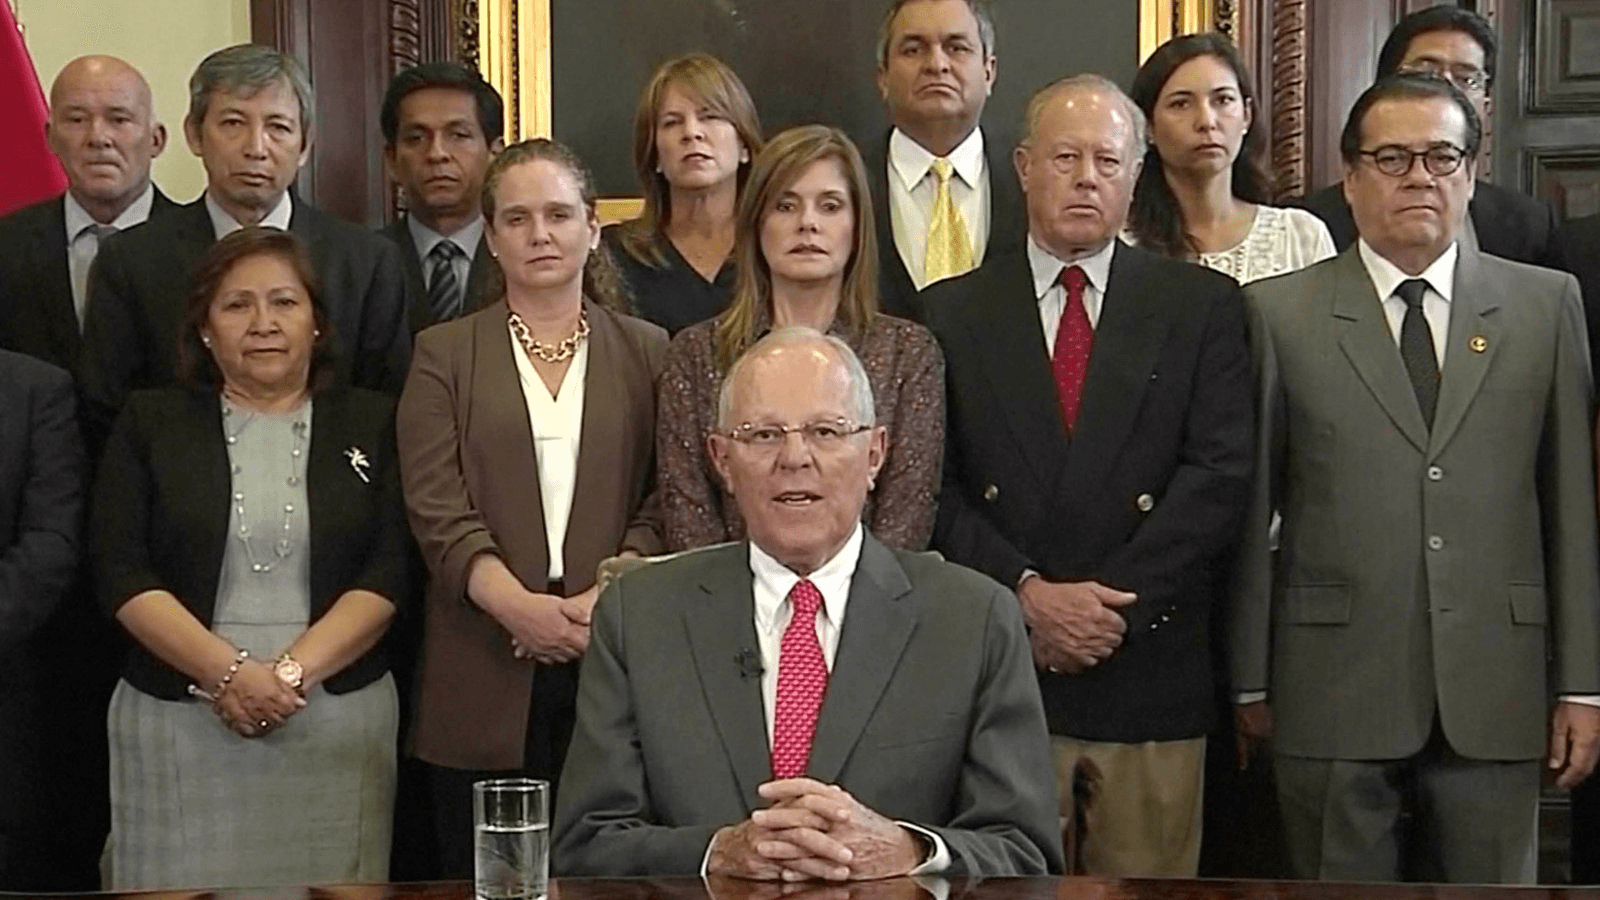 Peru's President Pedro Pablo Kuczynski is seen announcing his resignation at the Presidential Palace in Lima, Peru, March 21, 2018 in this still image from video.